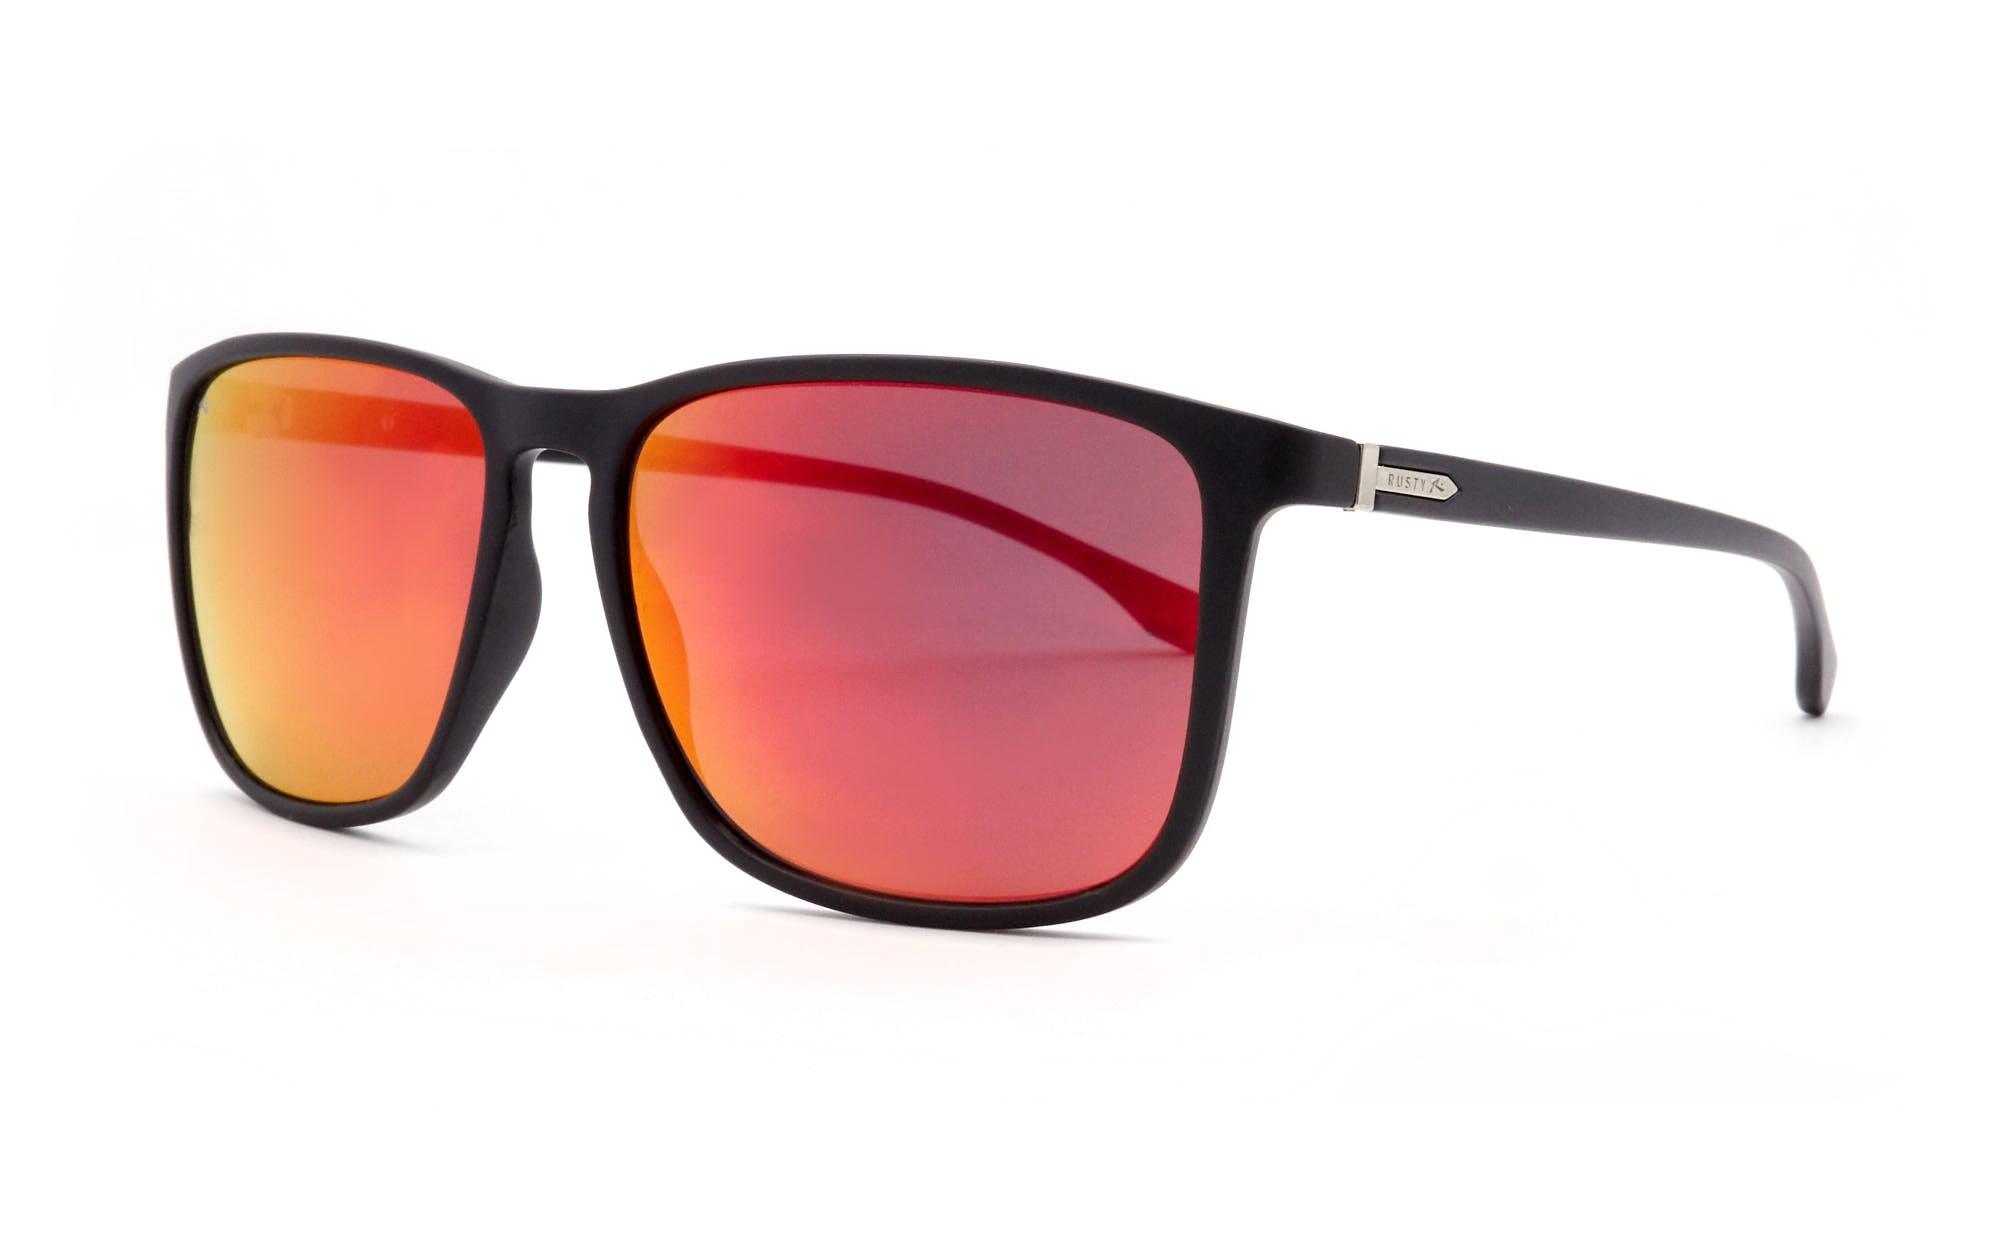 rusty roum mblk revo red - Opticas Lookout